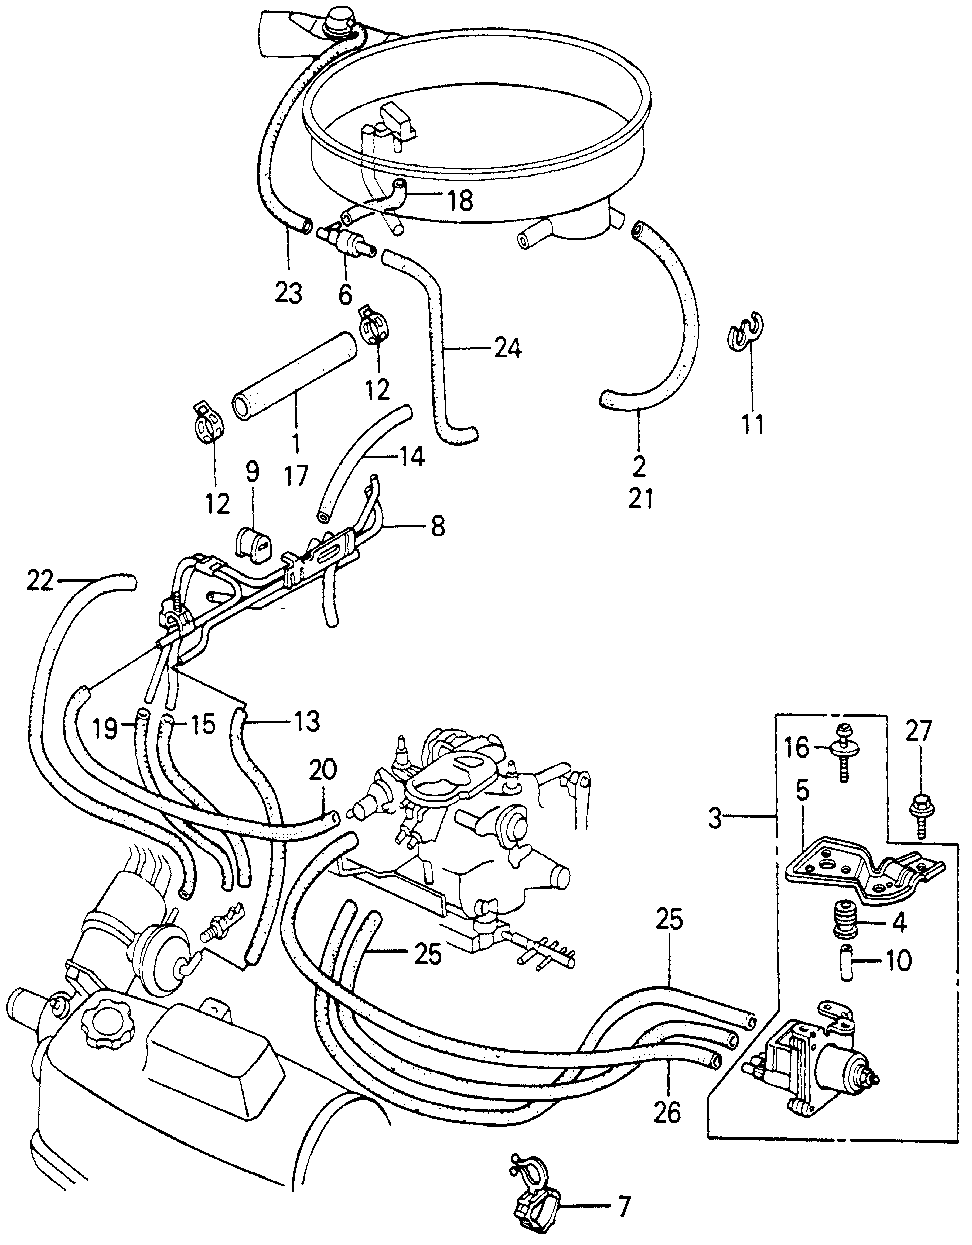 16810-PA6-682 - STAY, AIR JET CONTROL